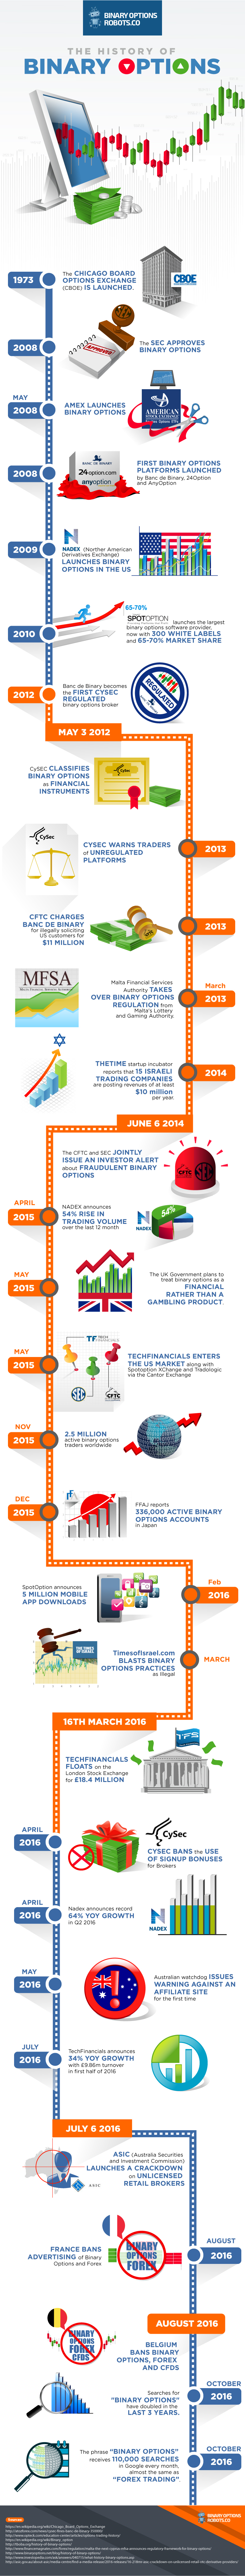 The History of Binary Options